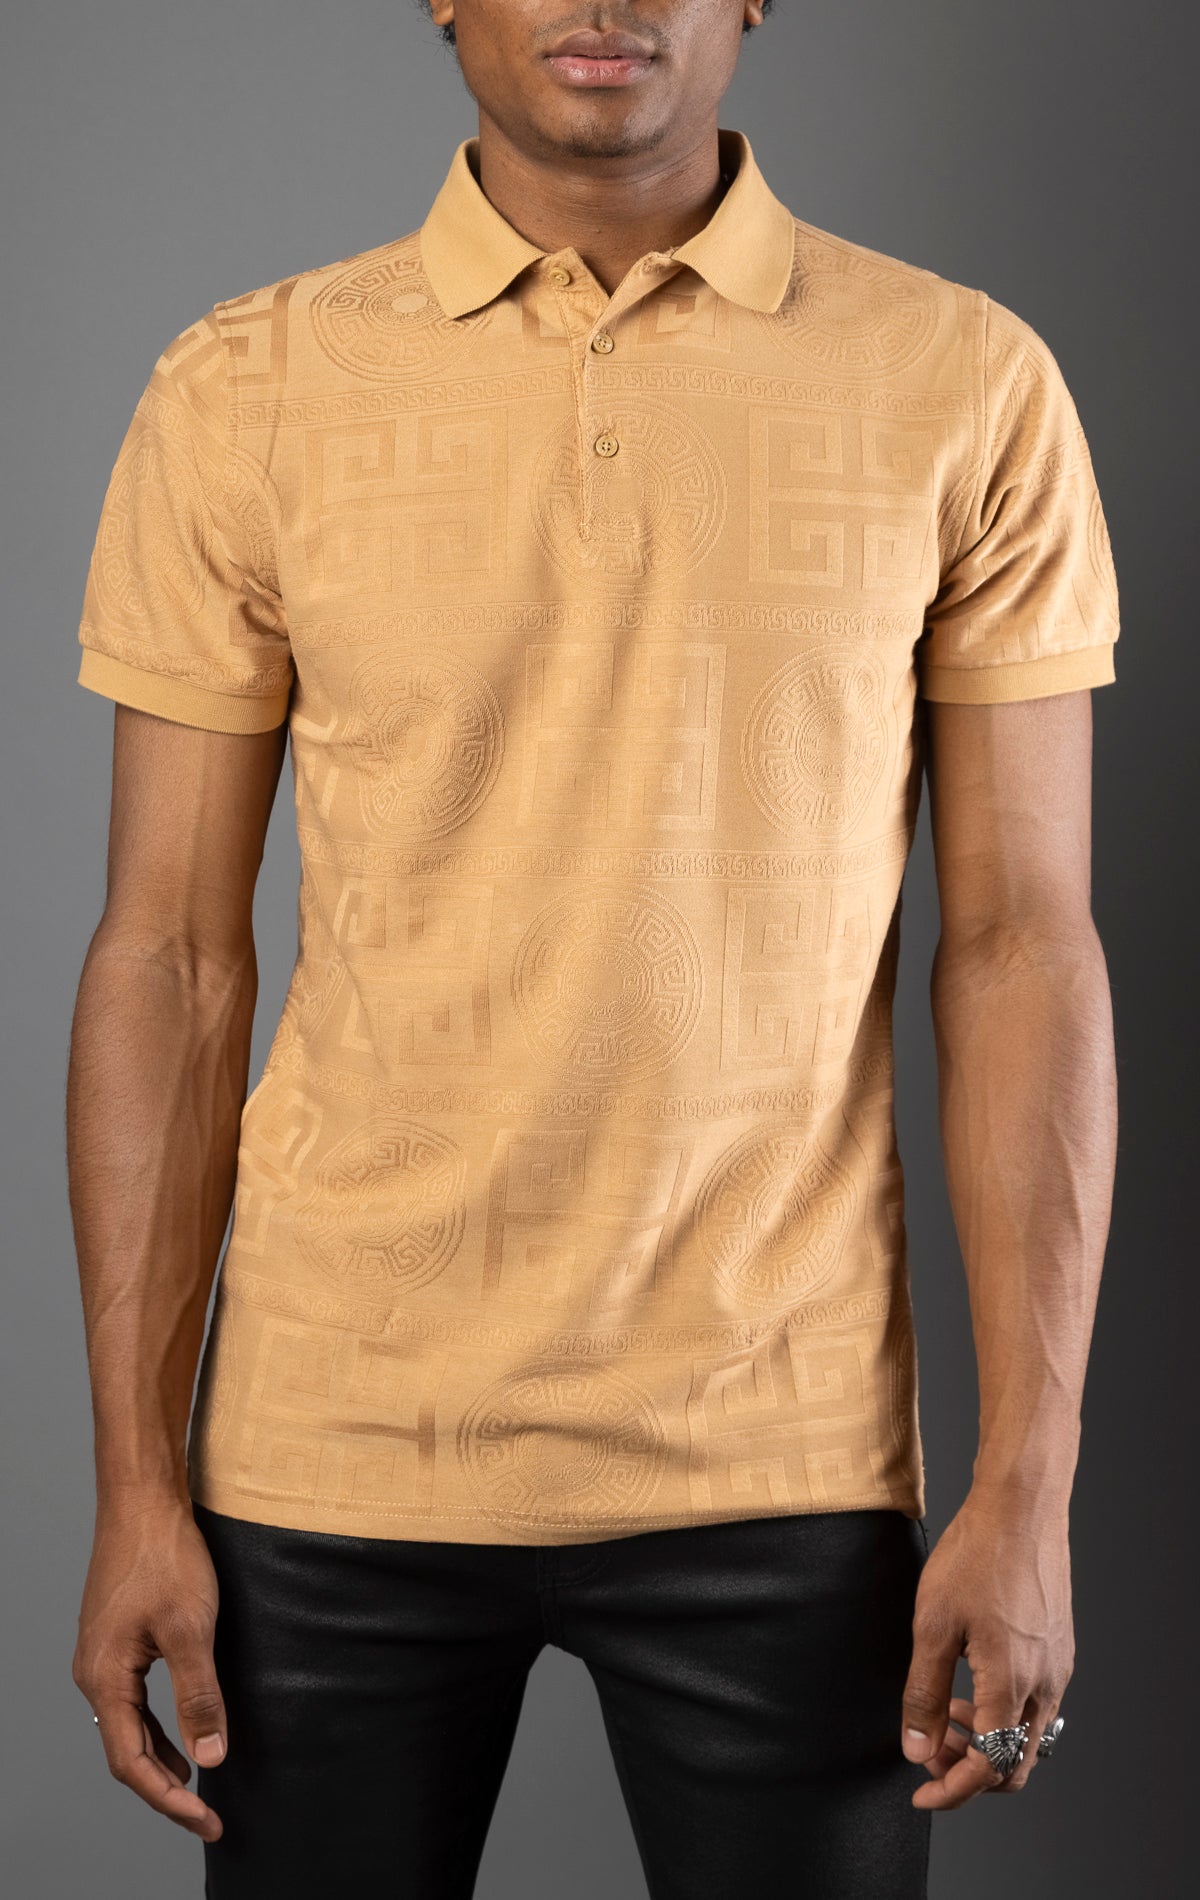 Khaki Men's regular-fit, short-sleeve polo shirt. The shirt features a seamless Greek pattern and a classic polo design